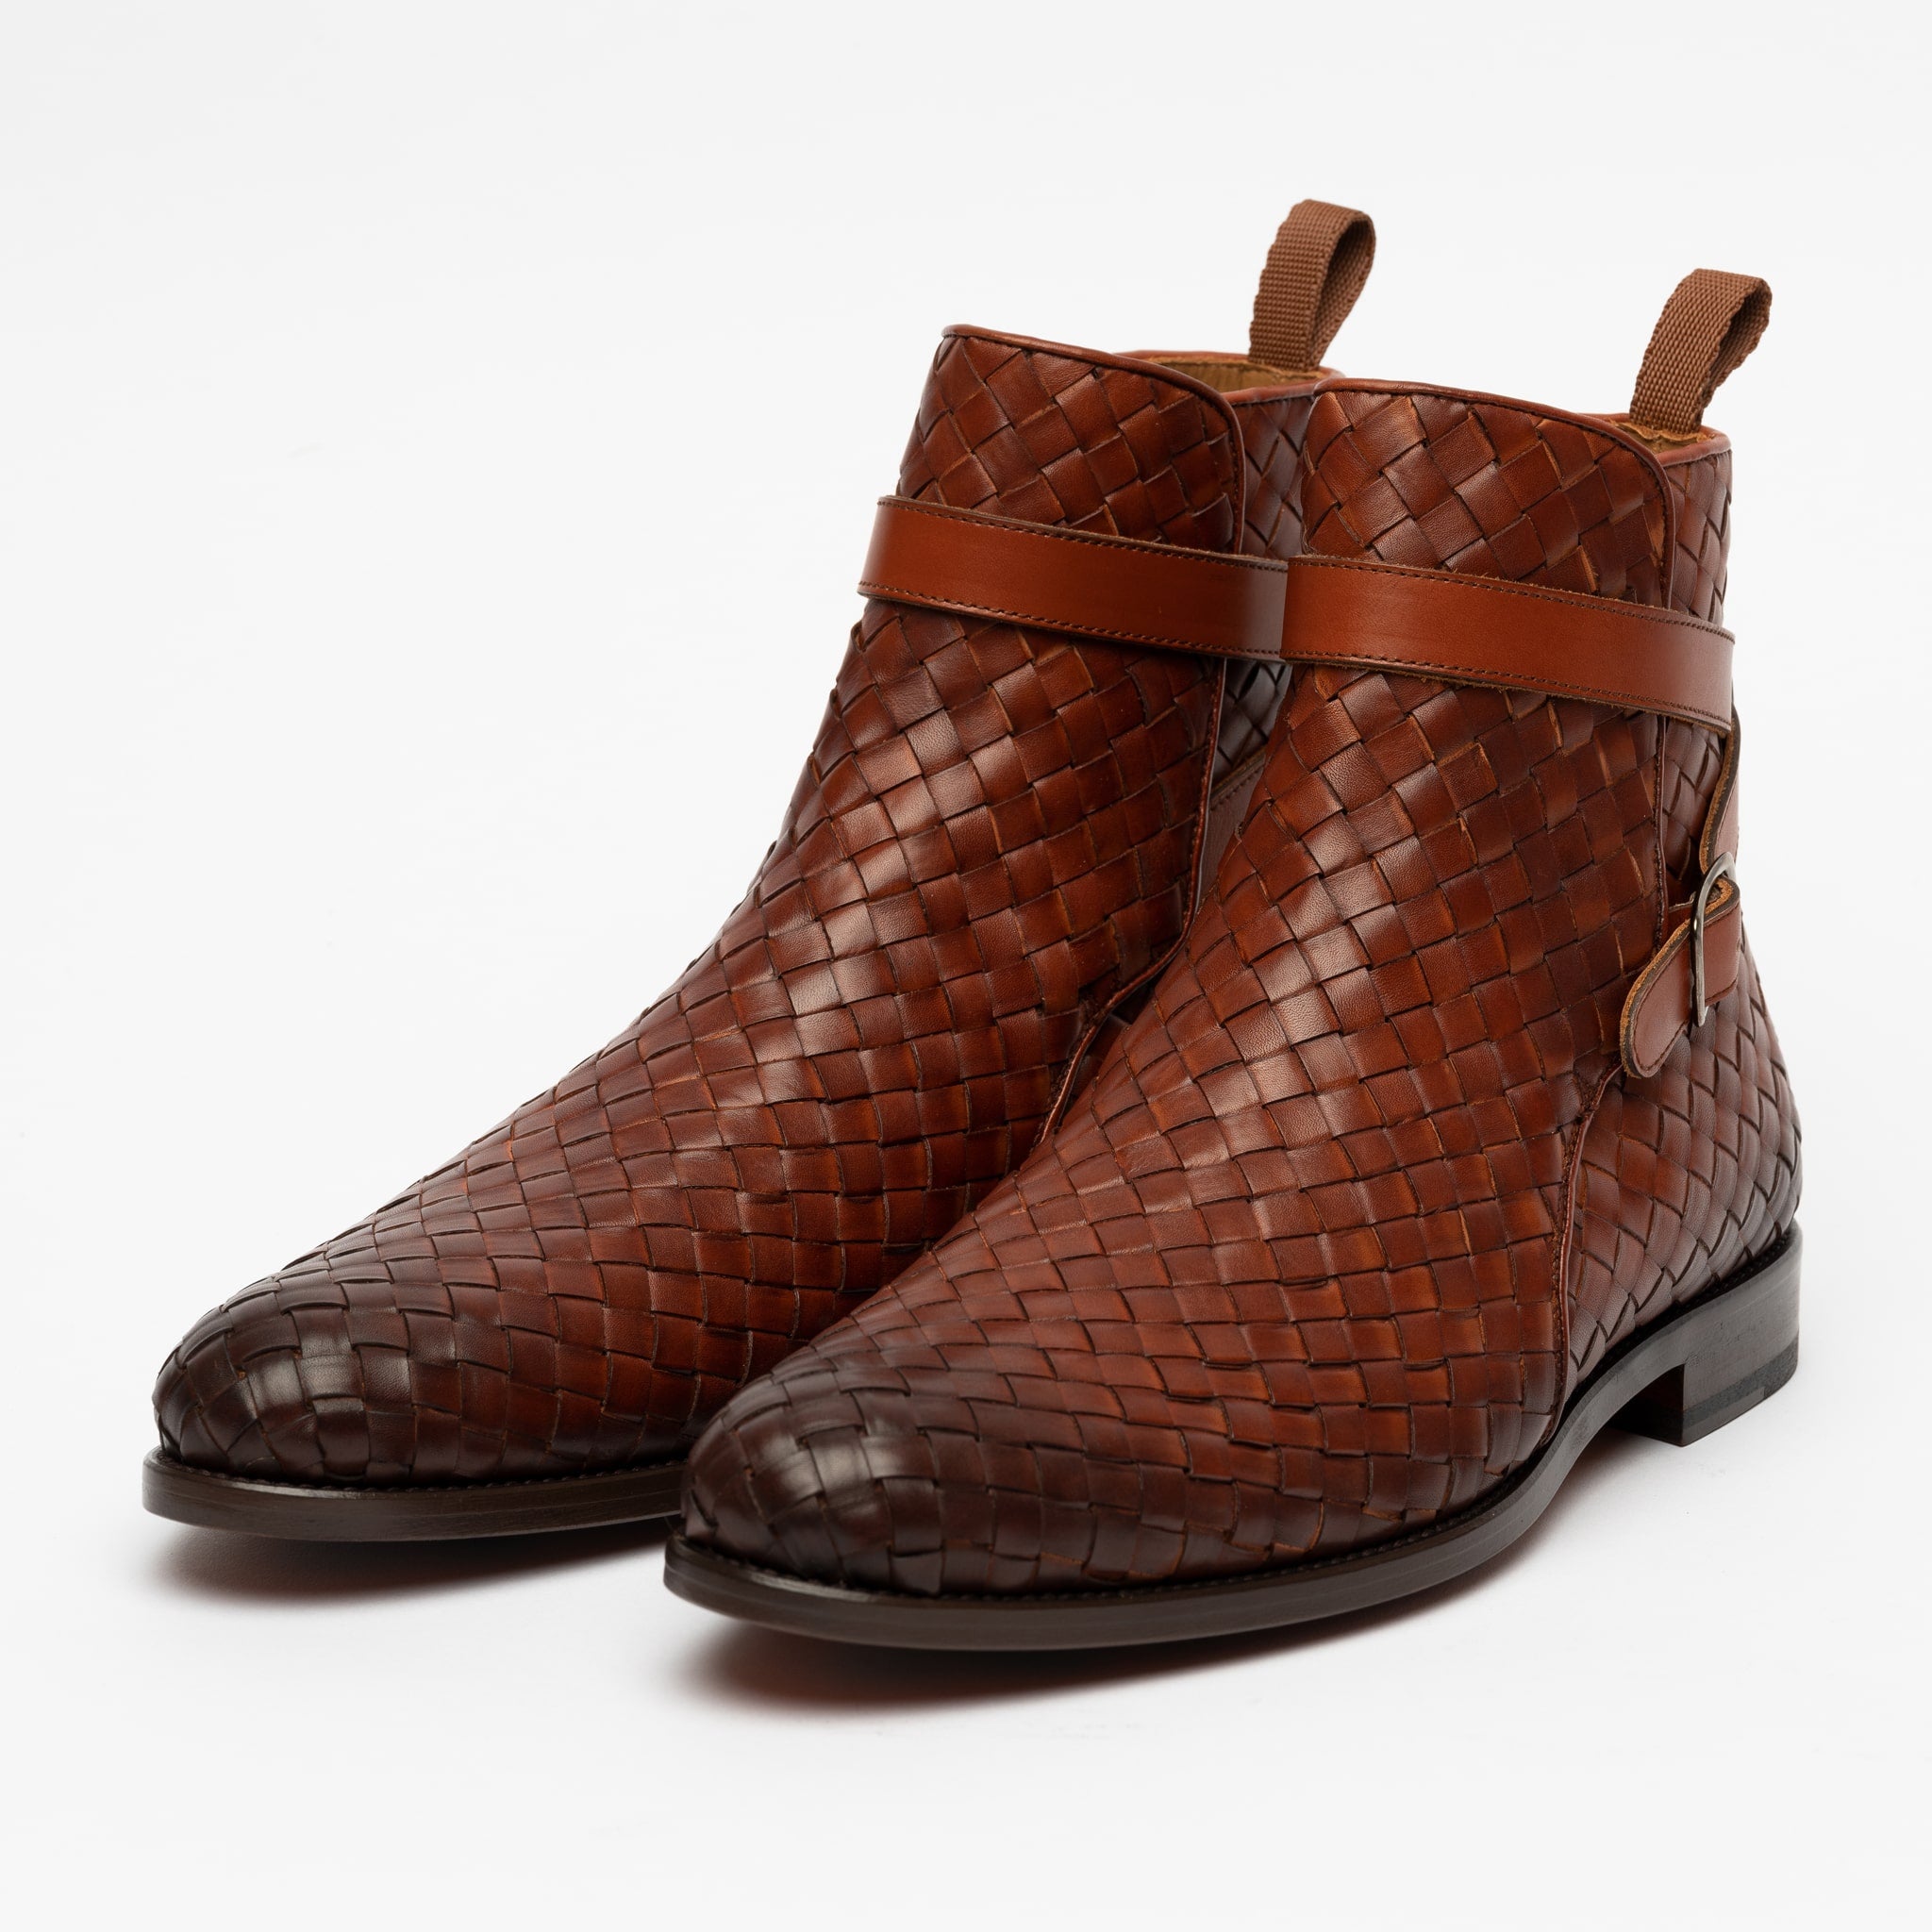 woven leather boots mens